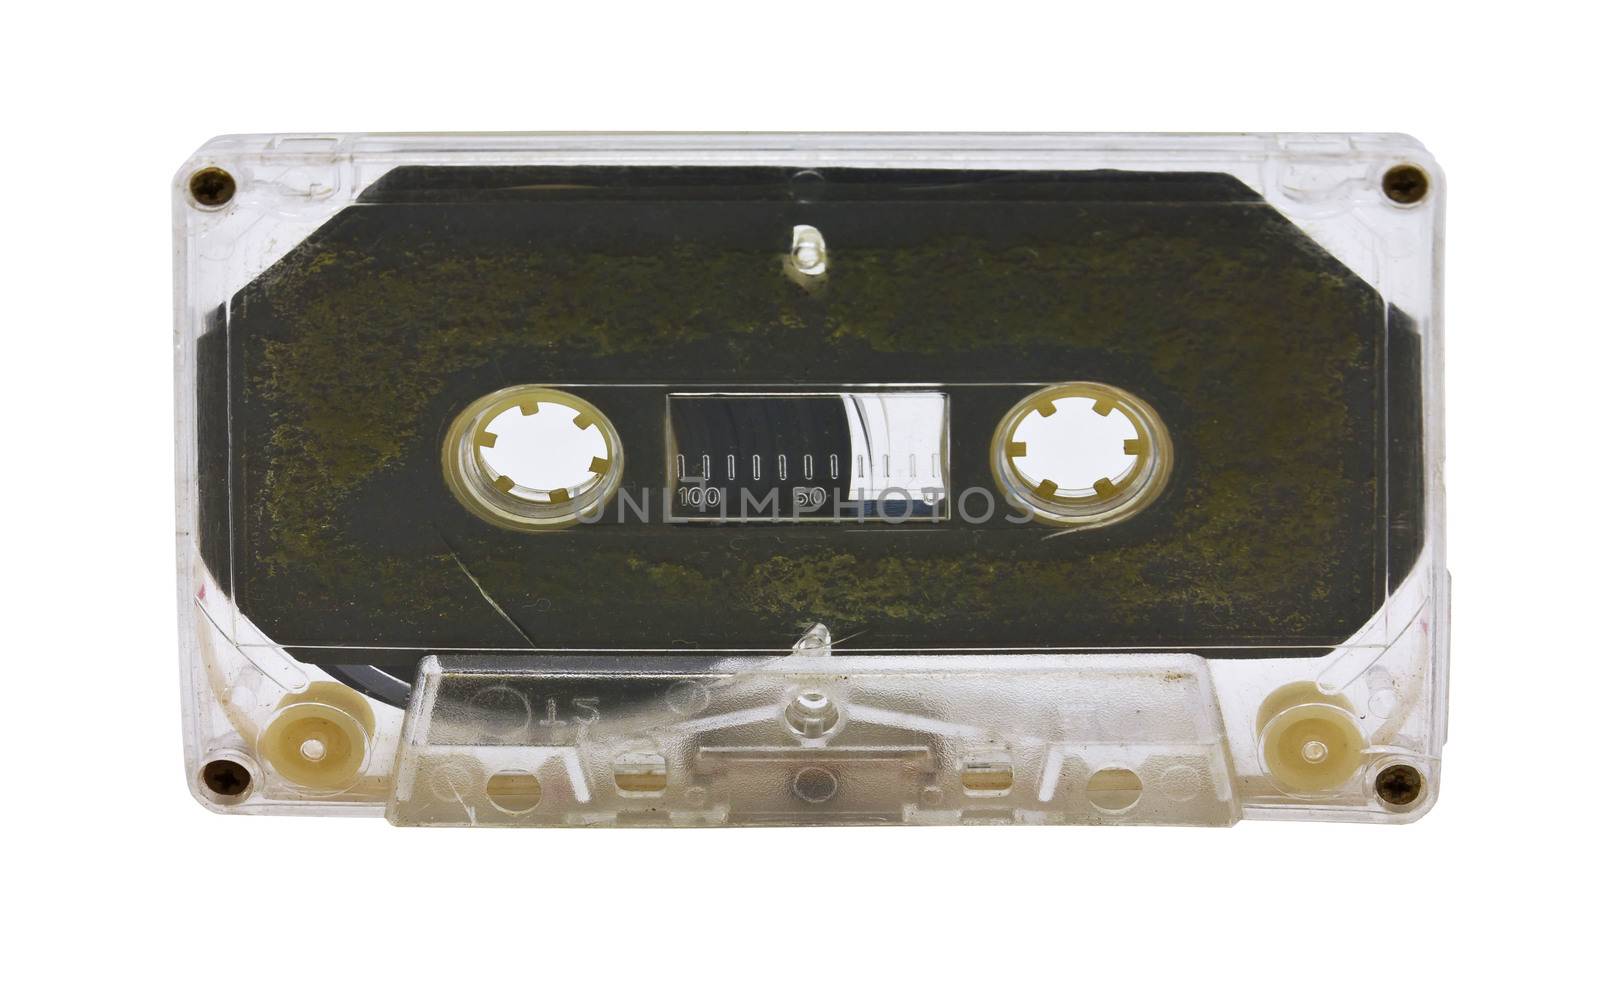 Old audio tape on white background. by sutipp11